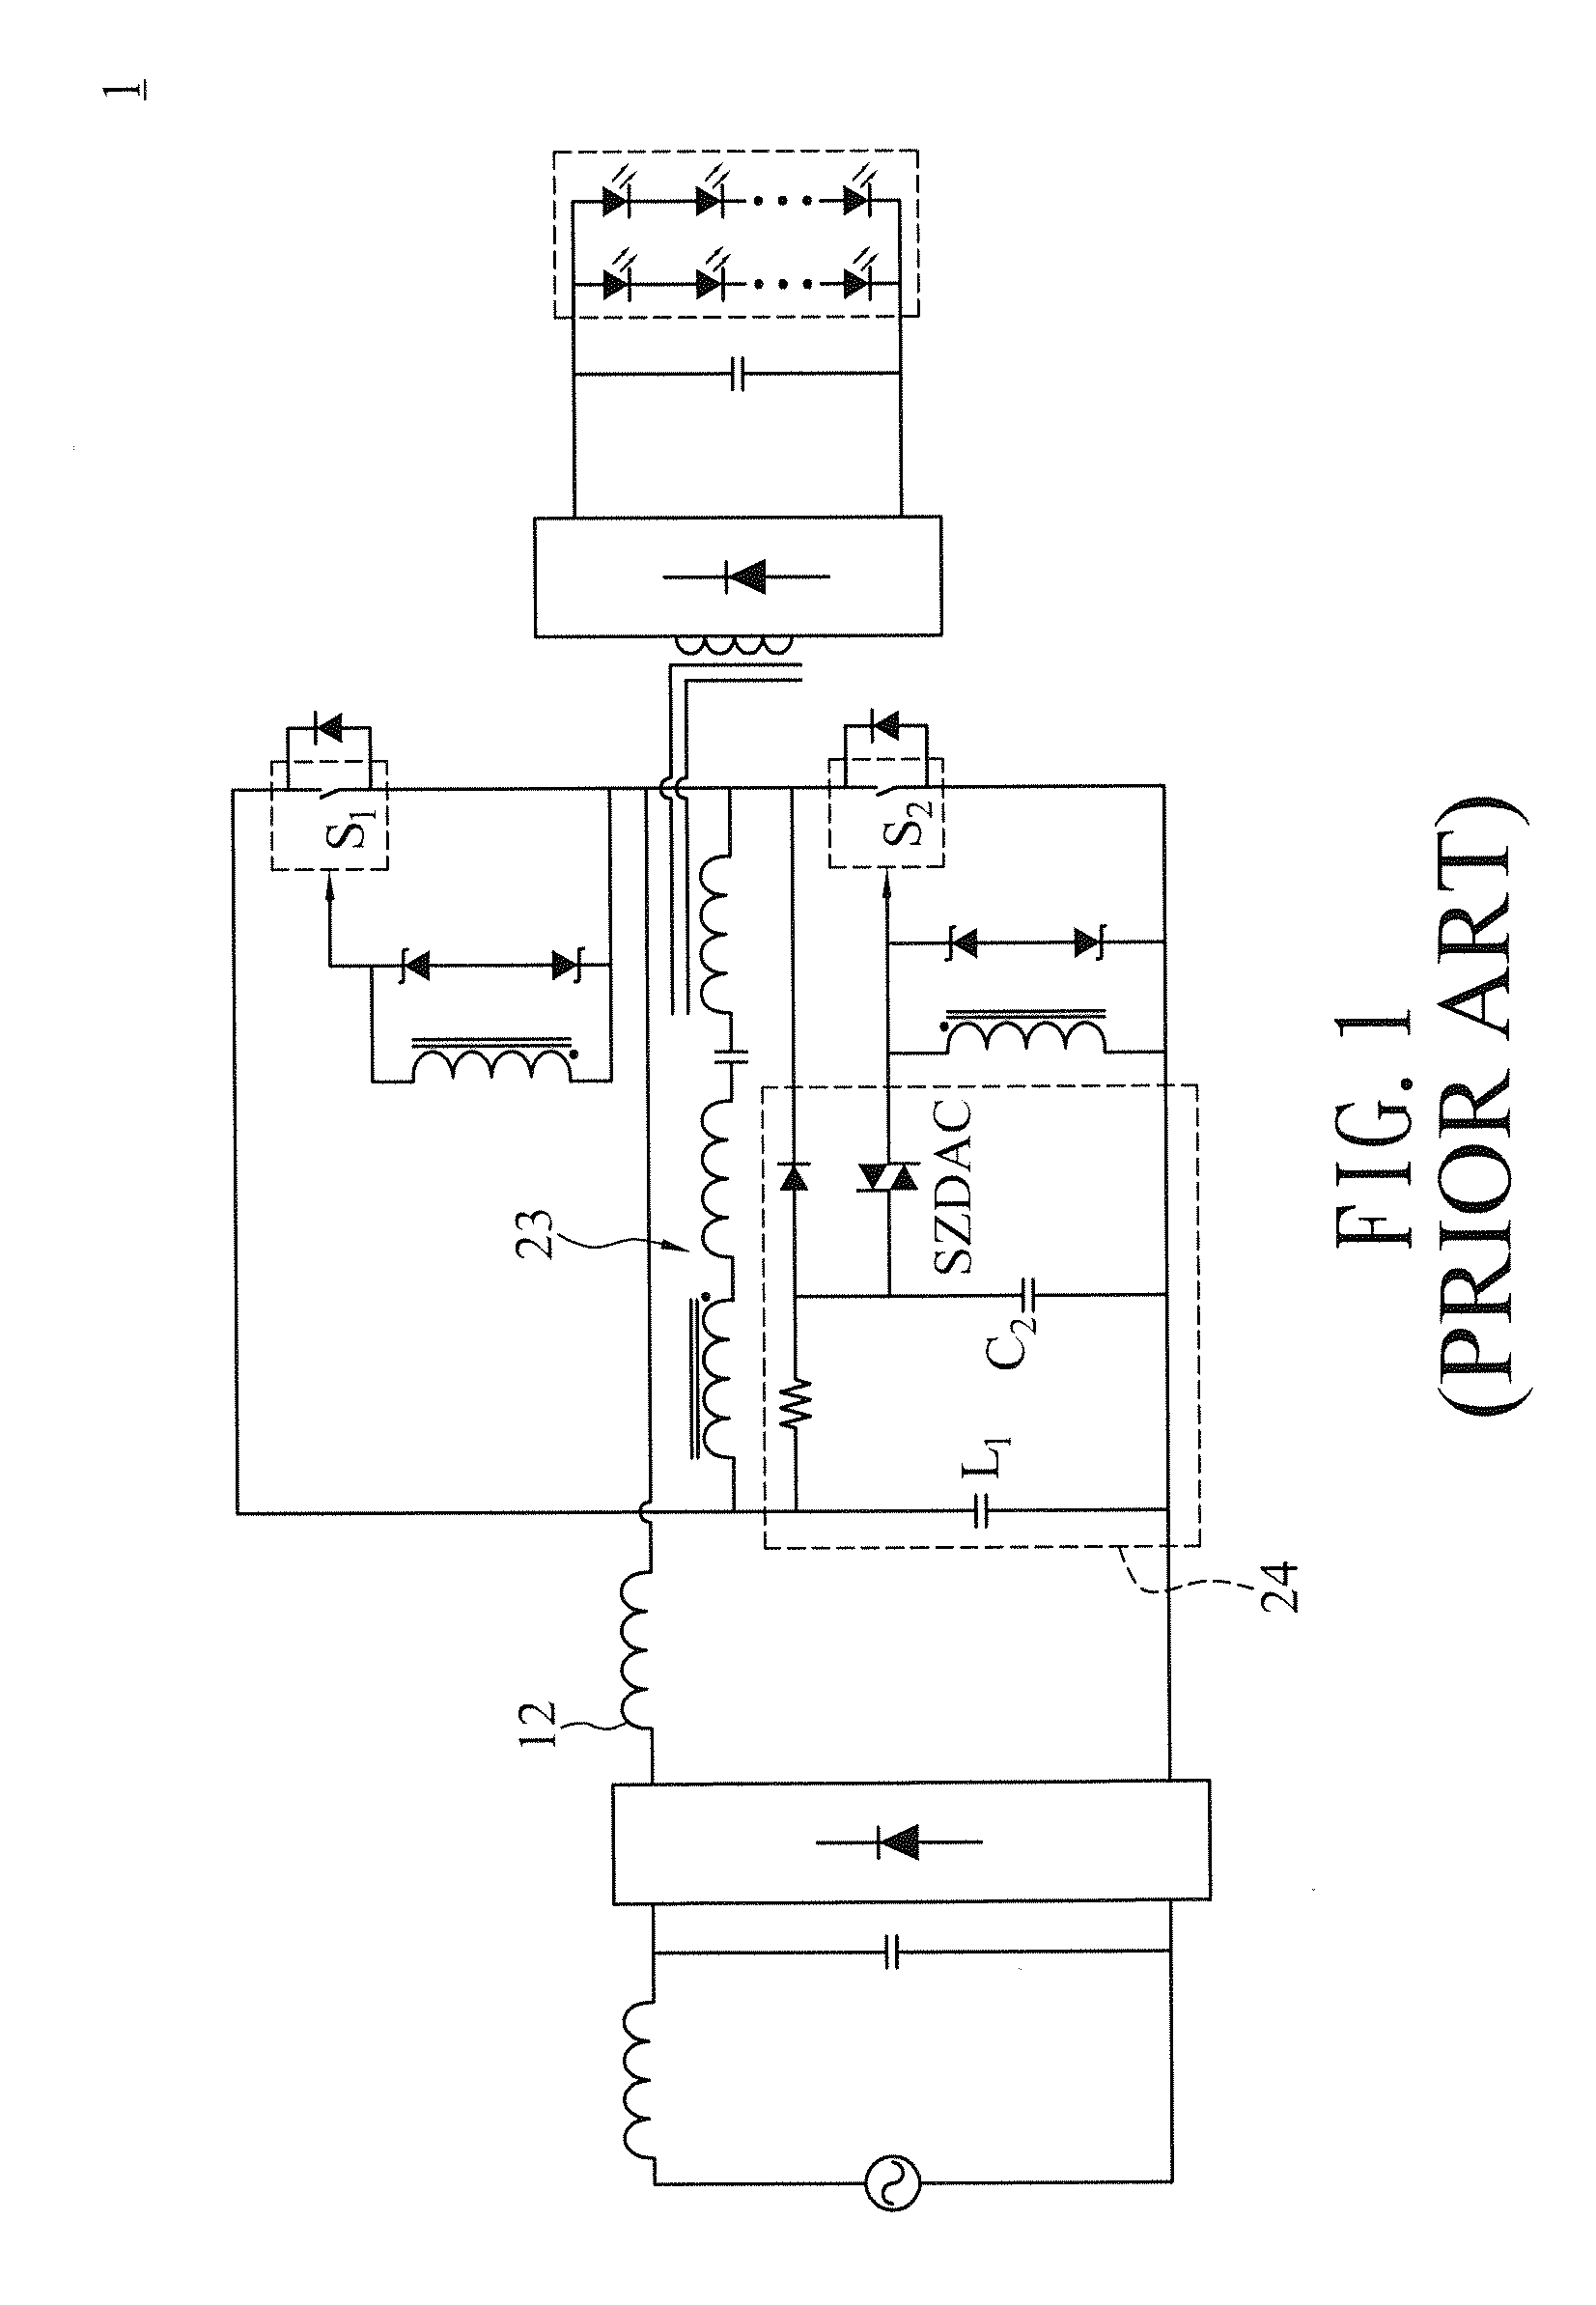 Self-excited power conversion circuit for secondary side control output power